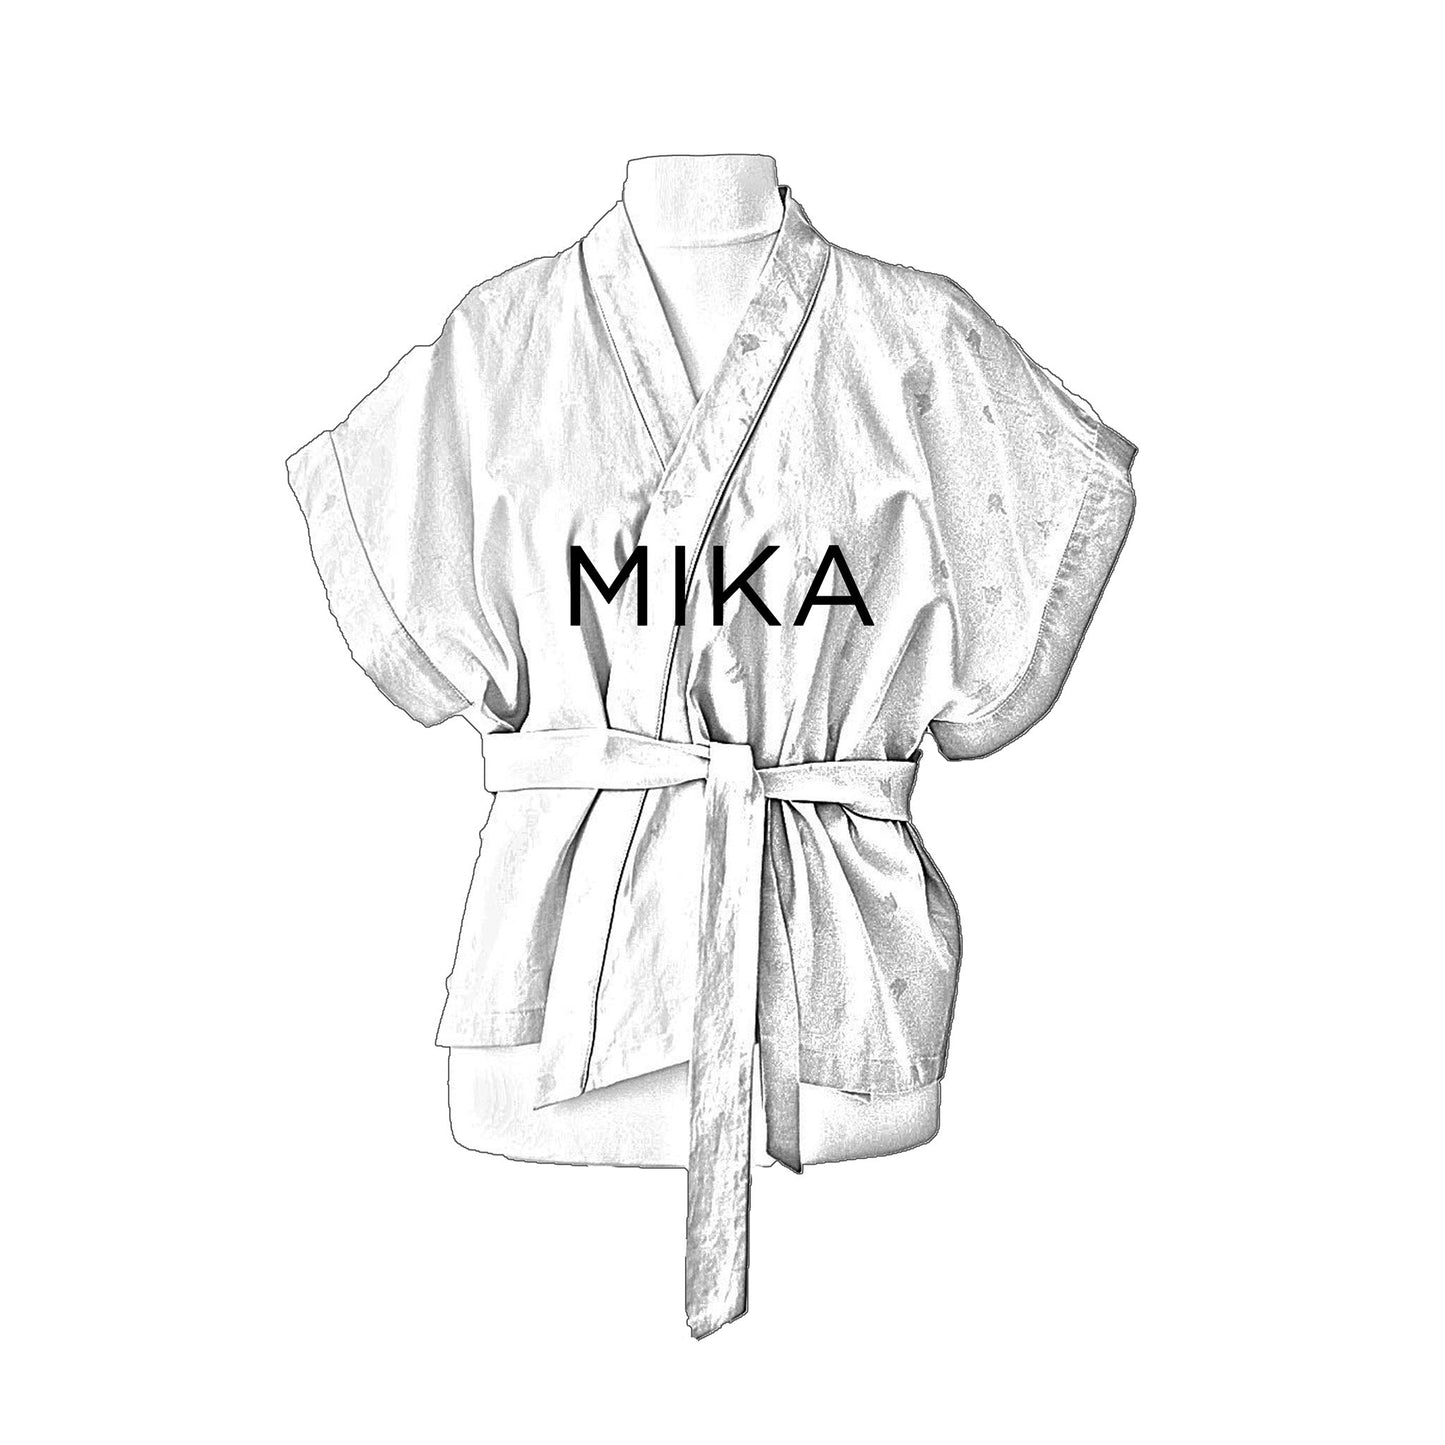 Made-to-order: Mika – Pastell, Gestreift